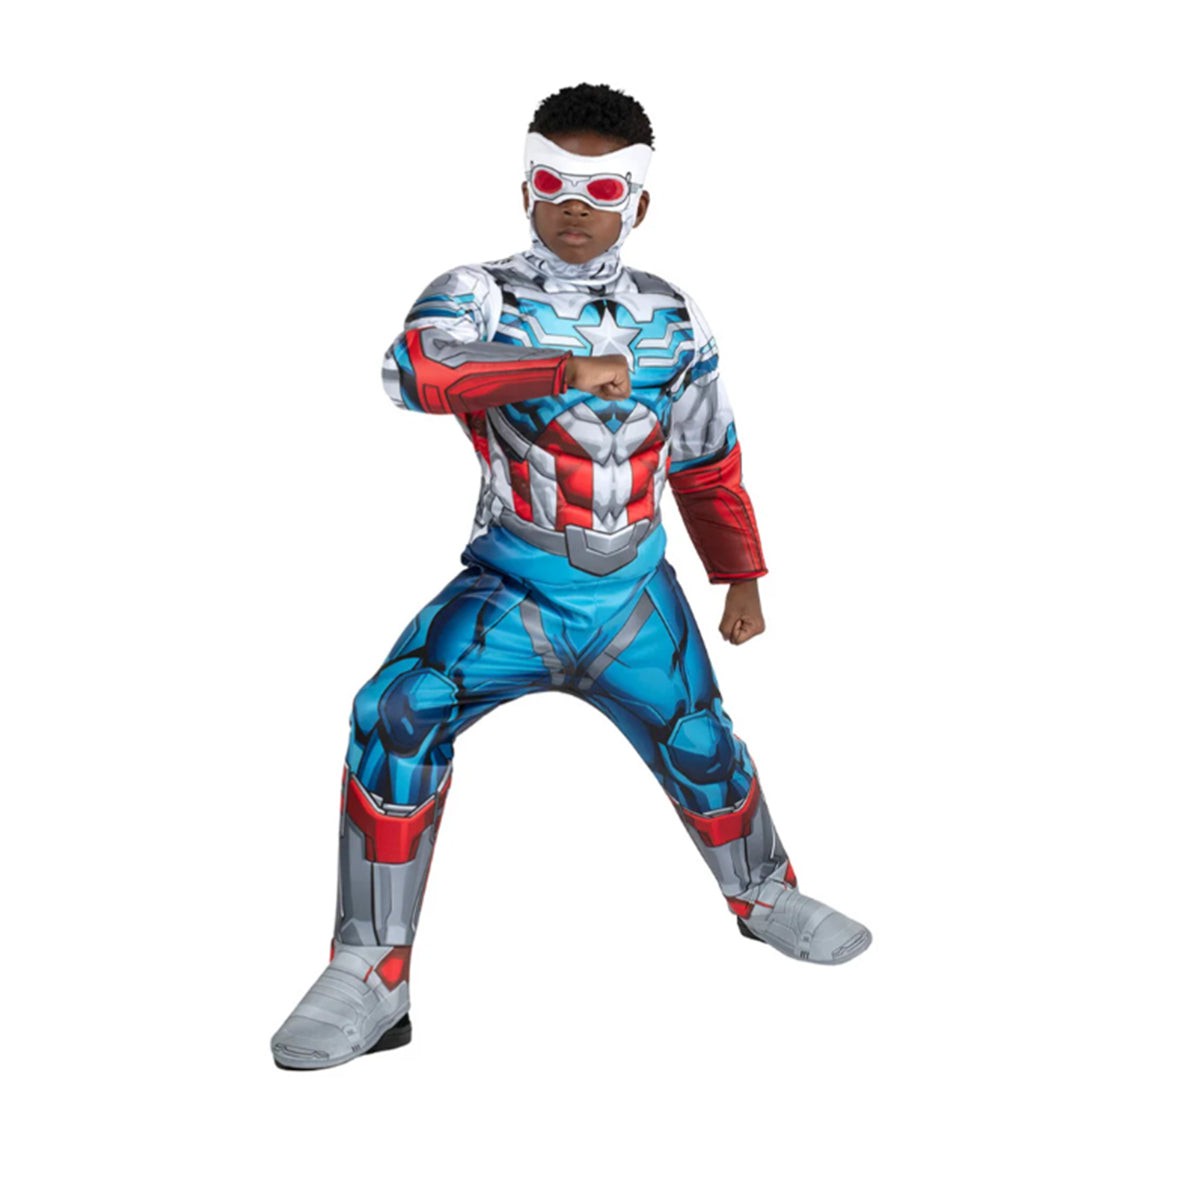 KROEGER Costumes Marvel Avengers Falcon Costume for Kids, Blue and Red Padded Jumpsuit